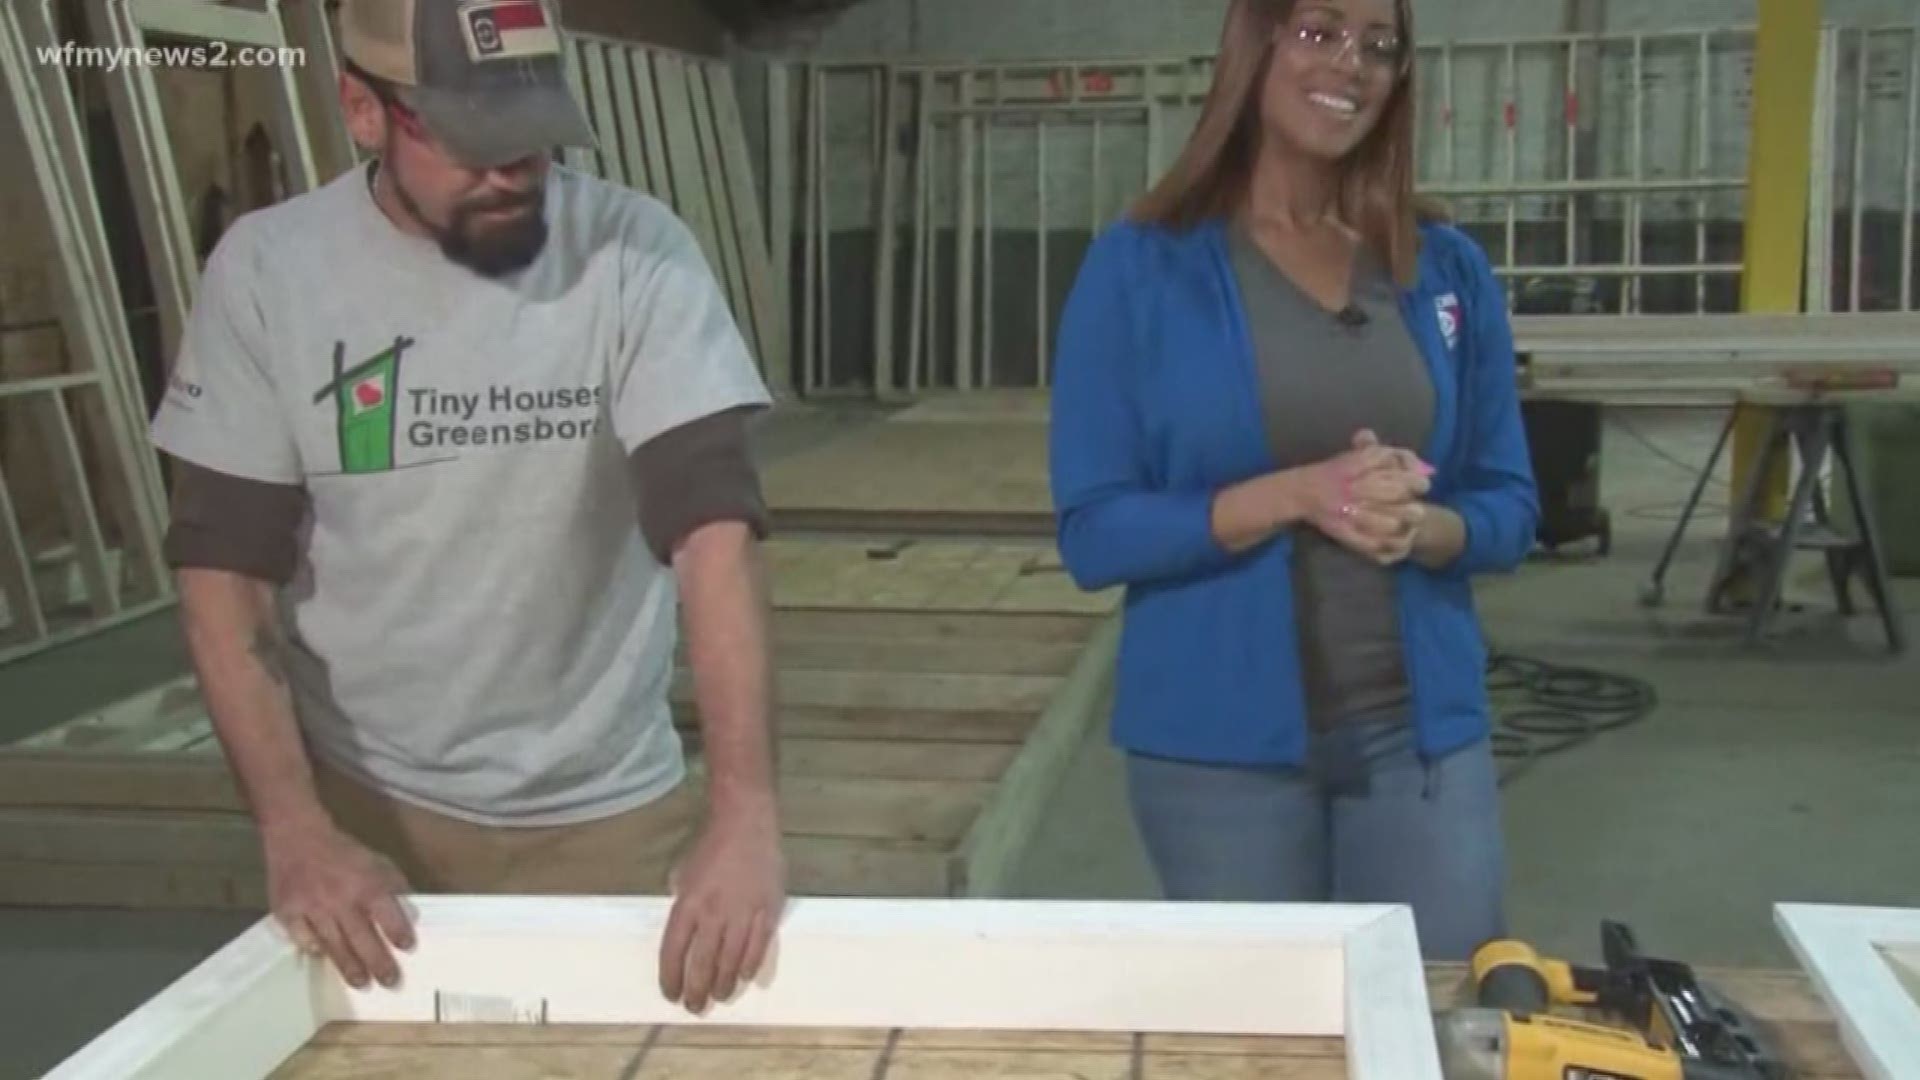 Tiny House Community Development is training individuals who are homeless in learning construction skills.